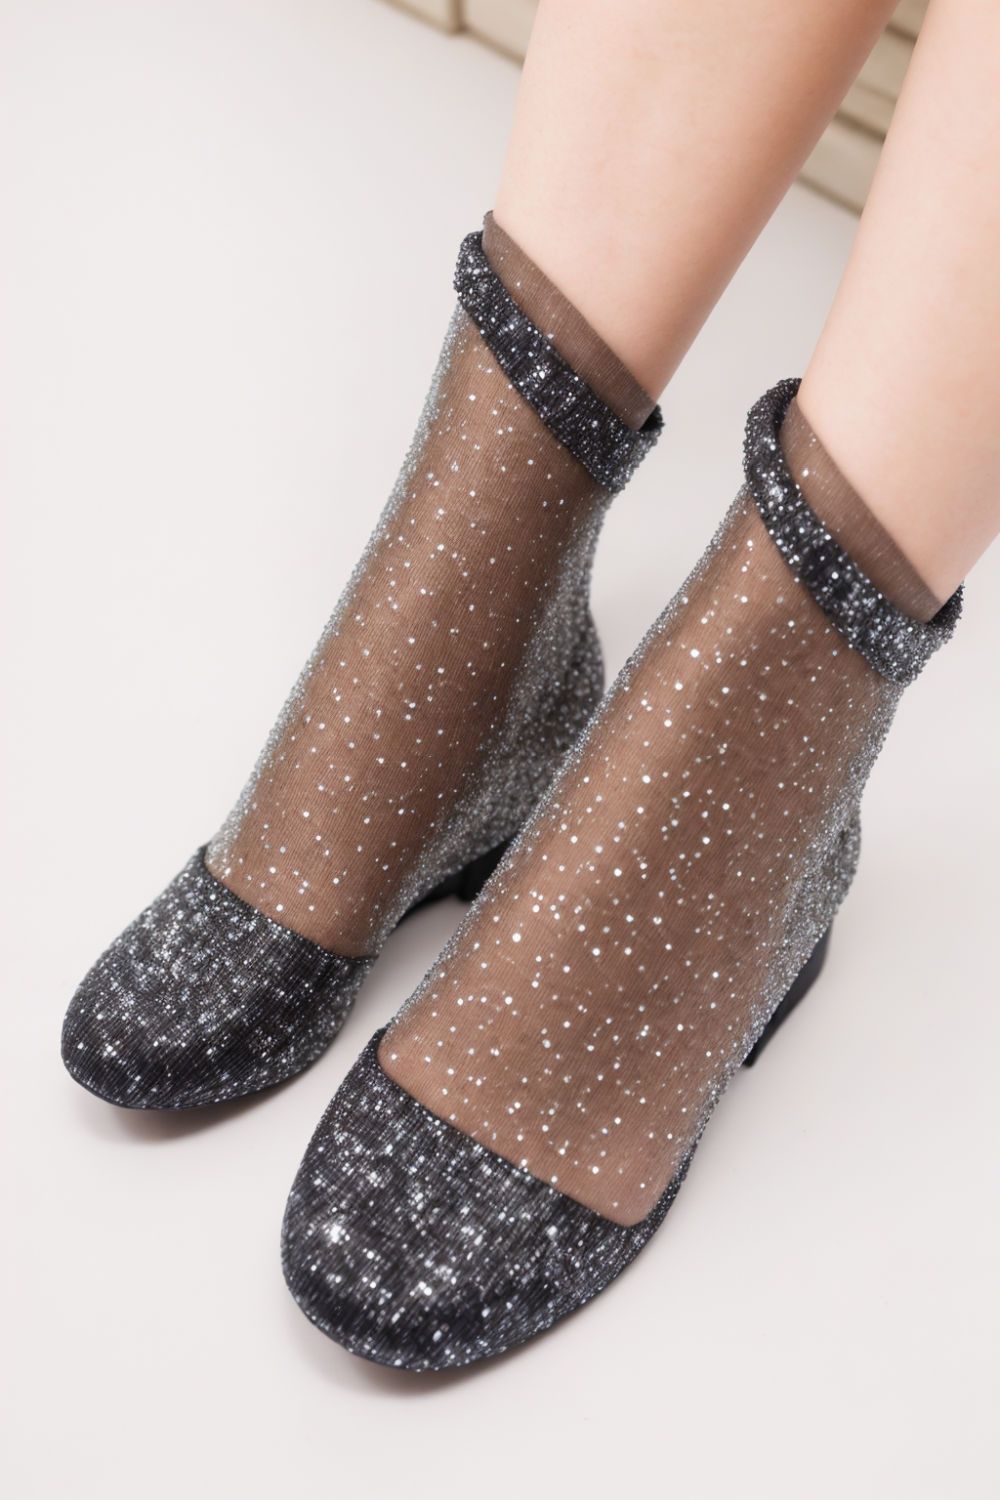 sparkly socks for new years outfit